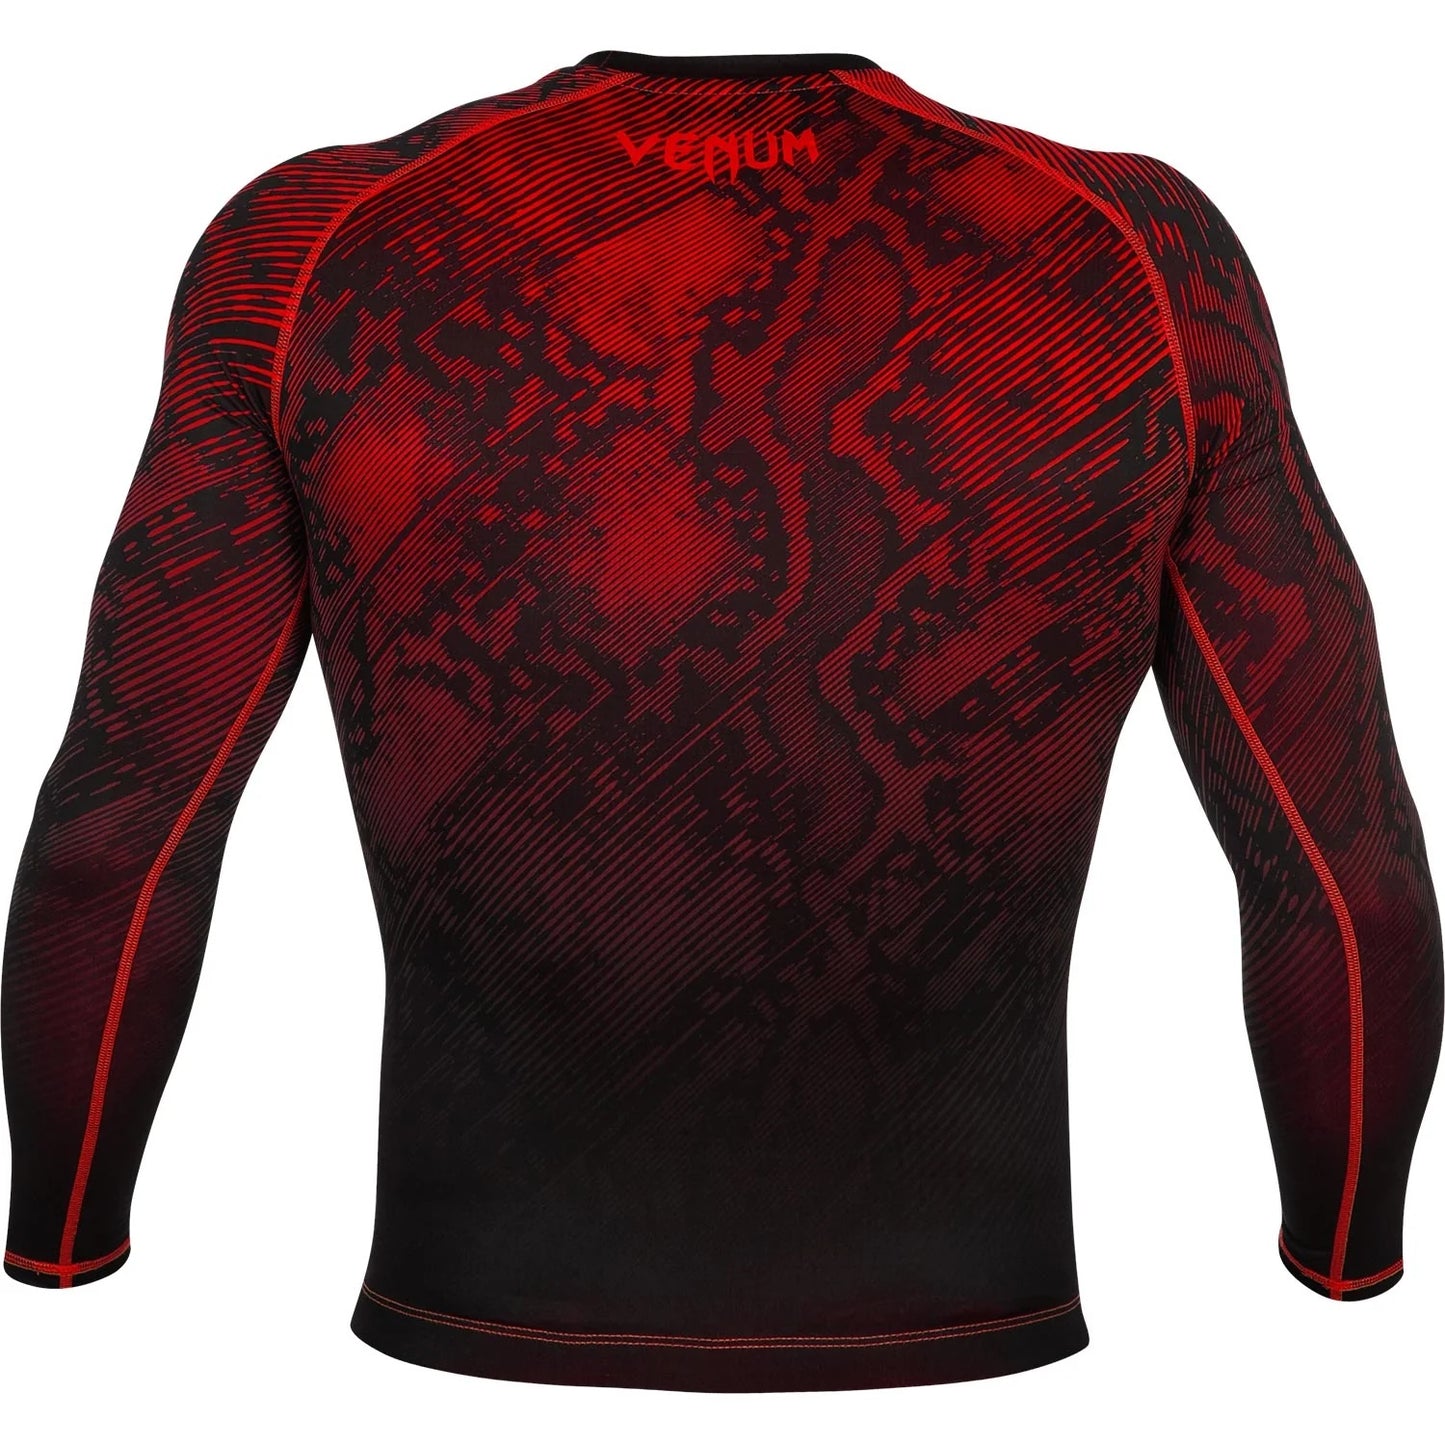 Fusion Compression T-shirt Long Sleeve - Black/Red